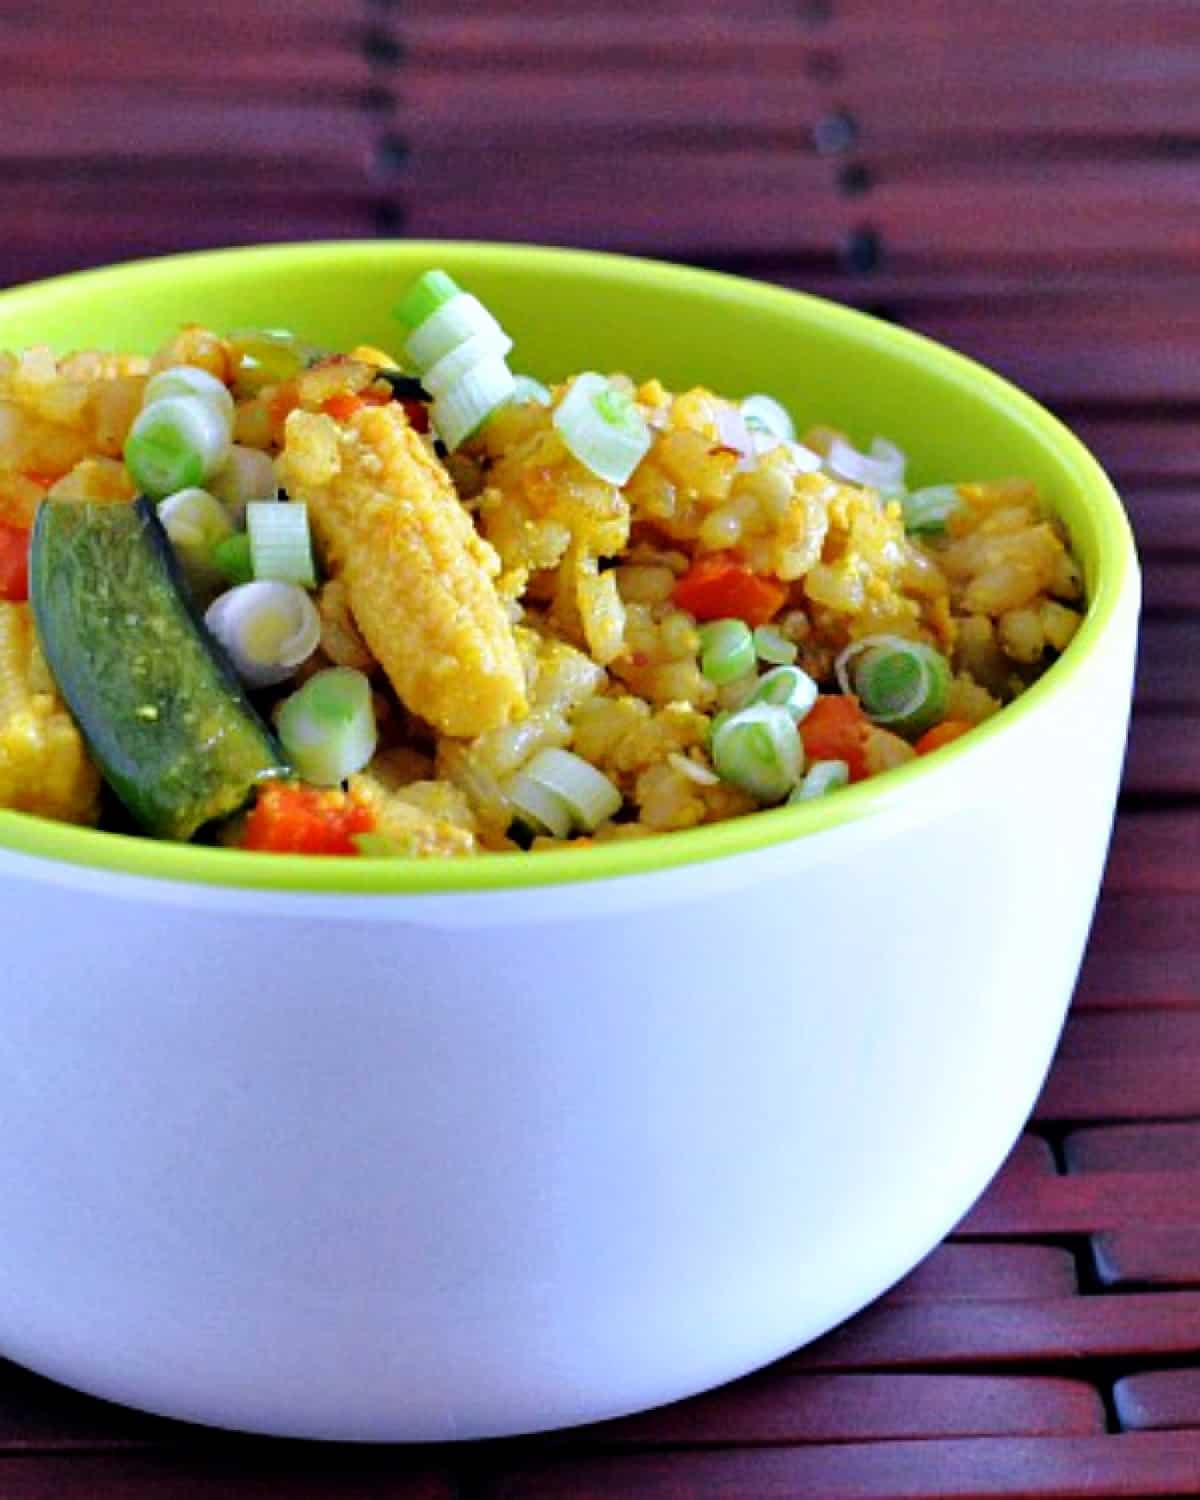 Veggie fried rice in a white bowl with bright green rim: pea shoots, baby corn, diced carrot, golden fried rice.